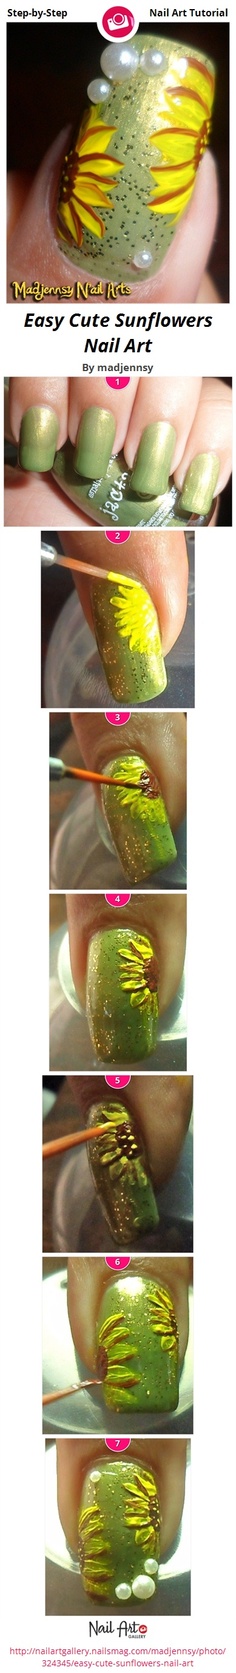 22 New Nails Tutorials you have to try (7)